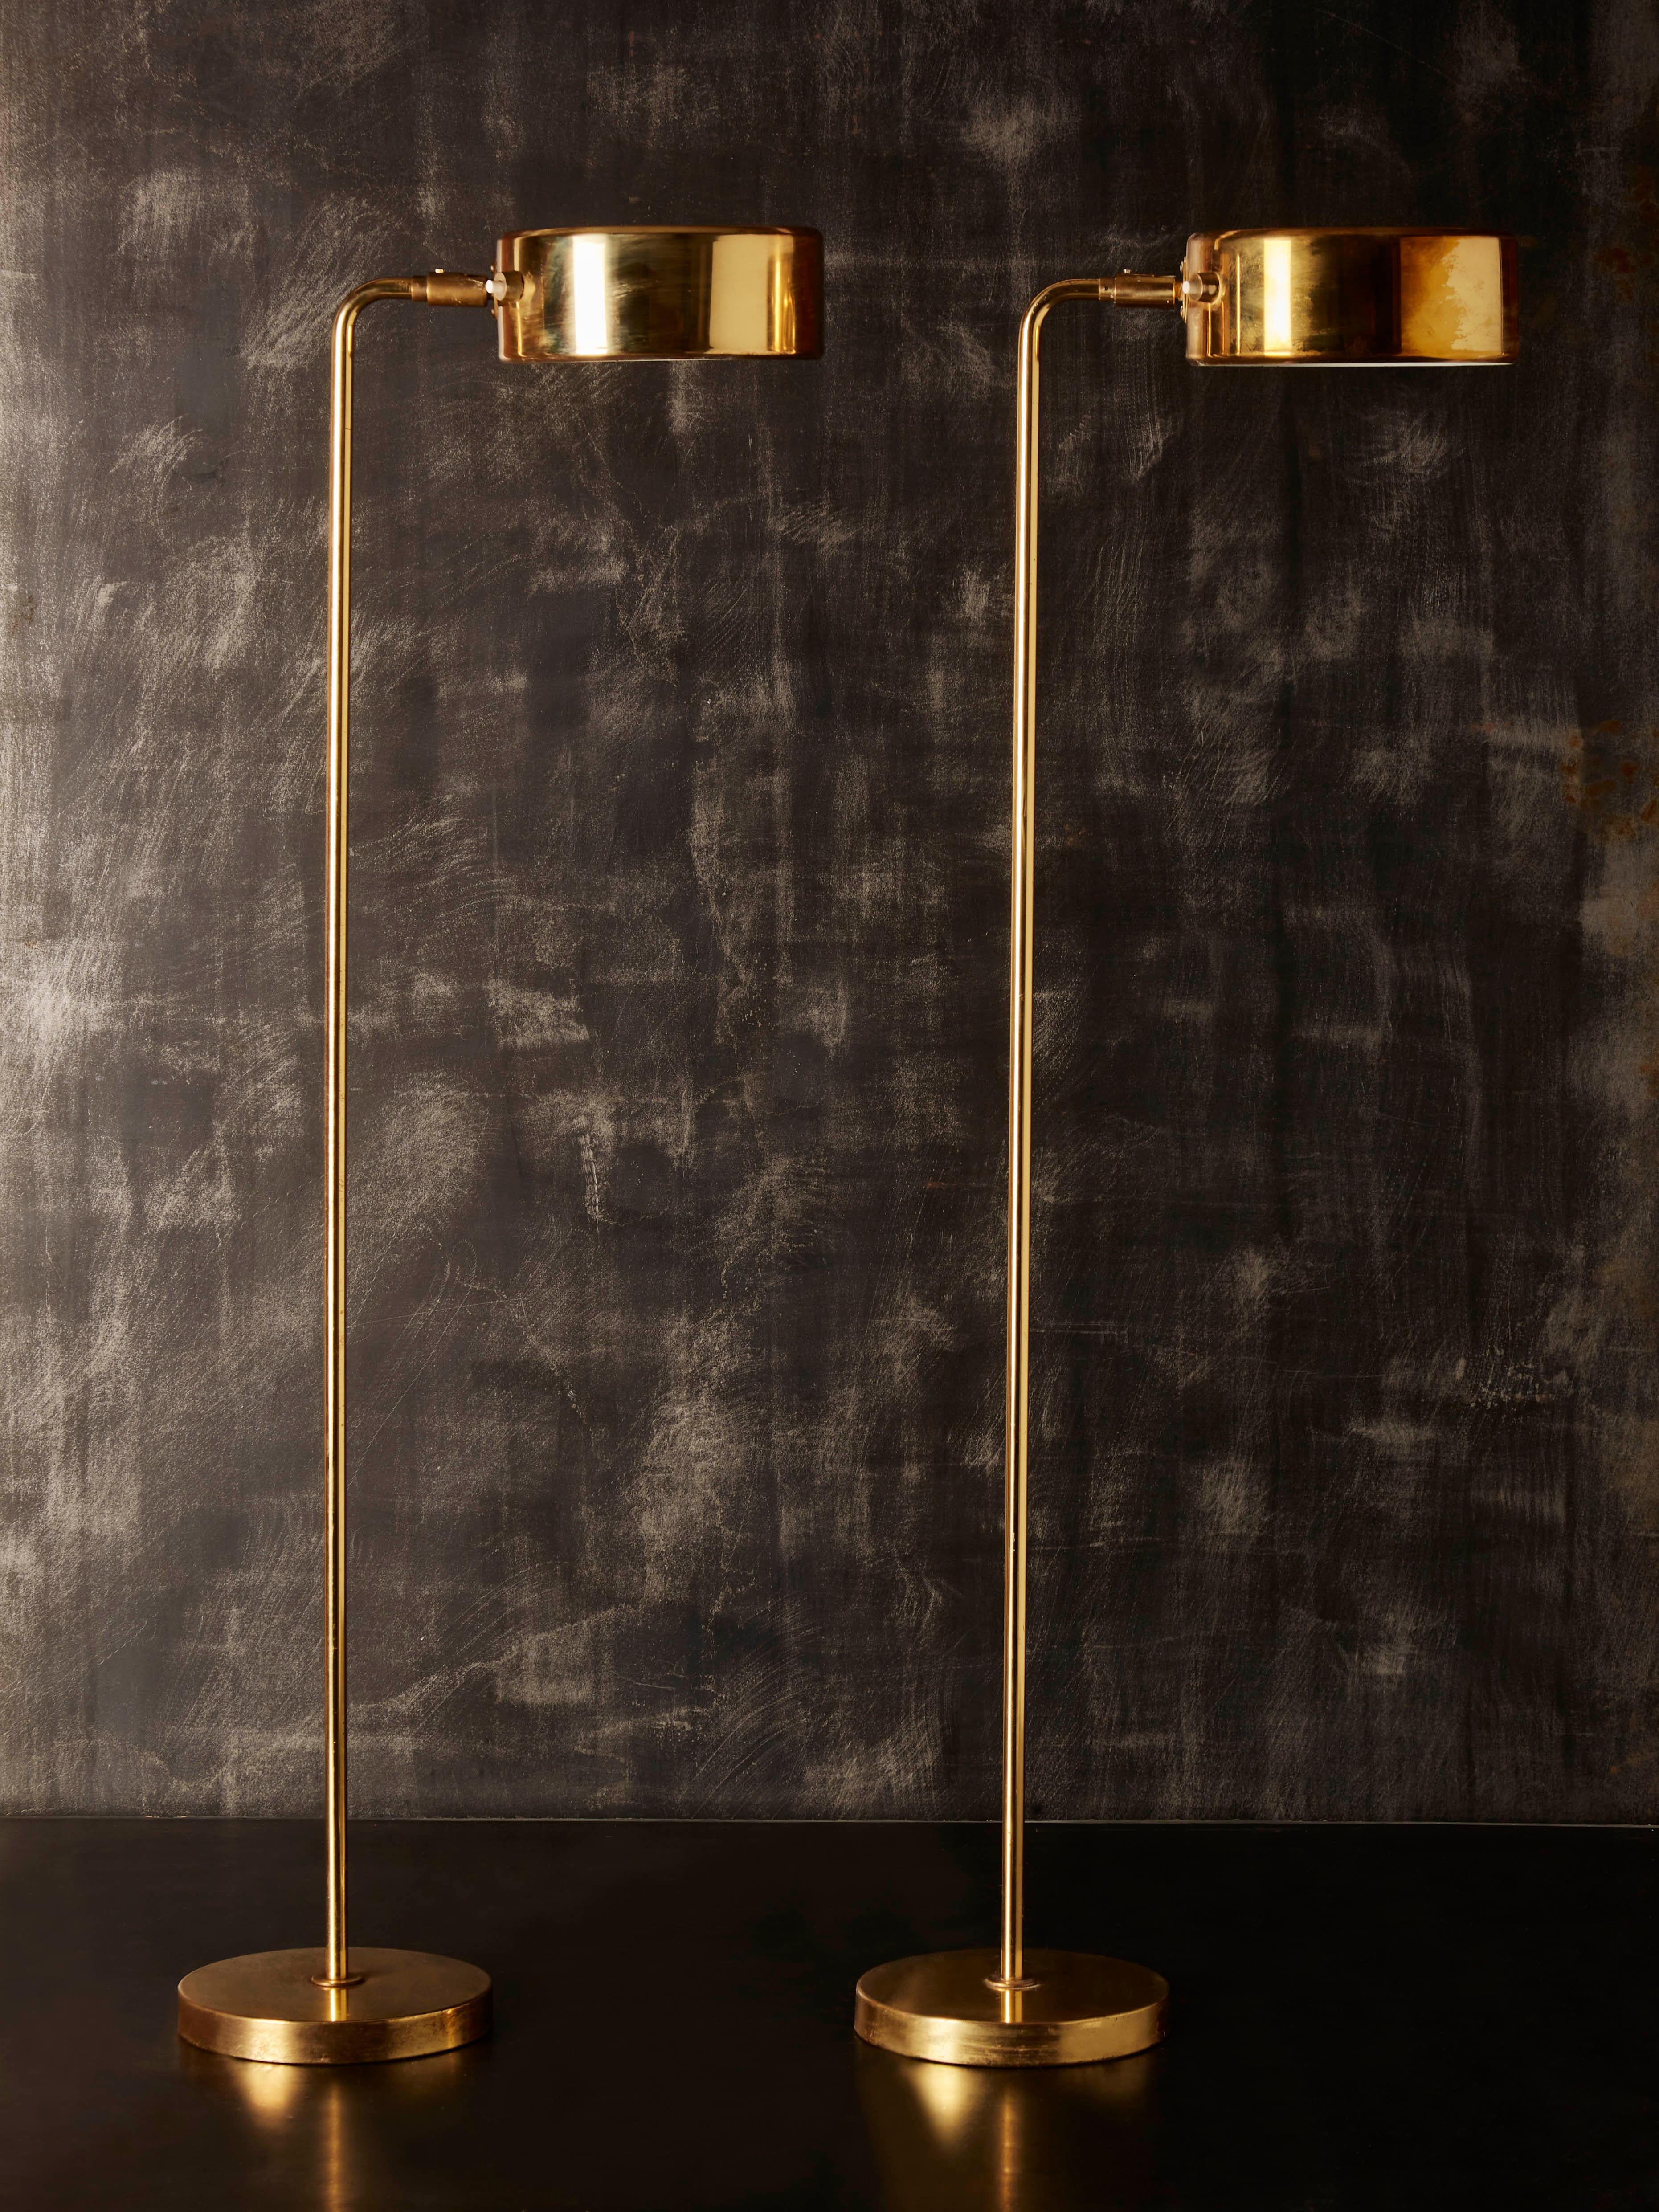 Pair of floor lamps designed by Anders Pehrson for Atelje Lyjktan.

All made in brass, circular foot and sconce with two lights, original sticker.